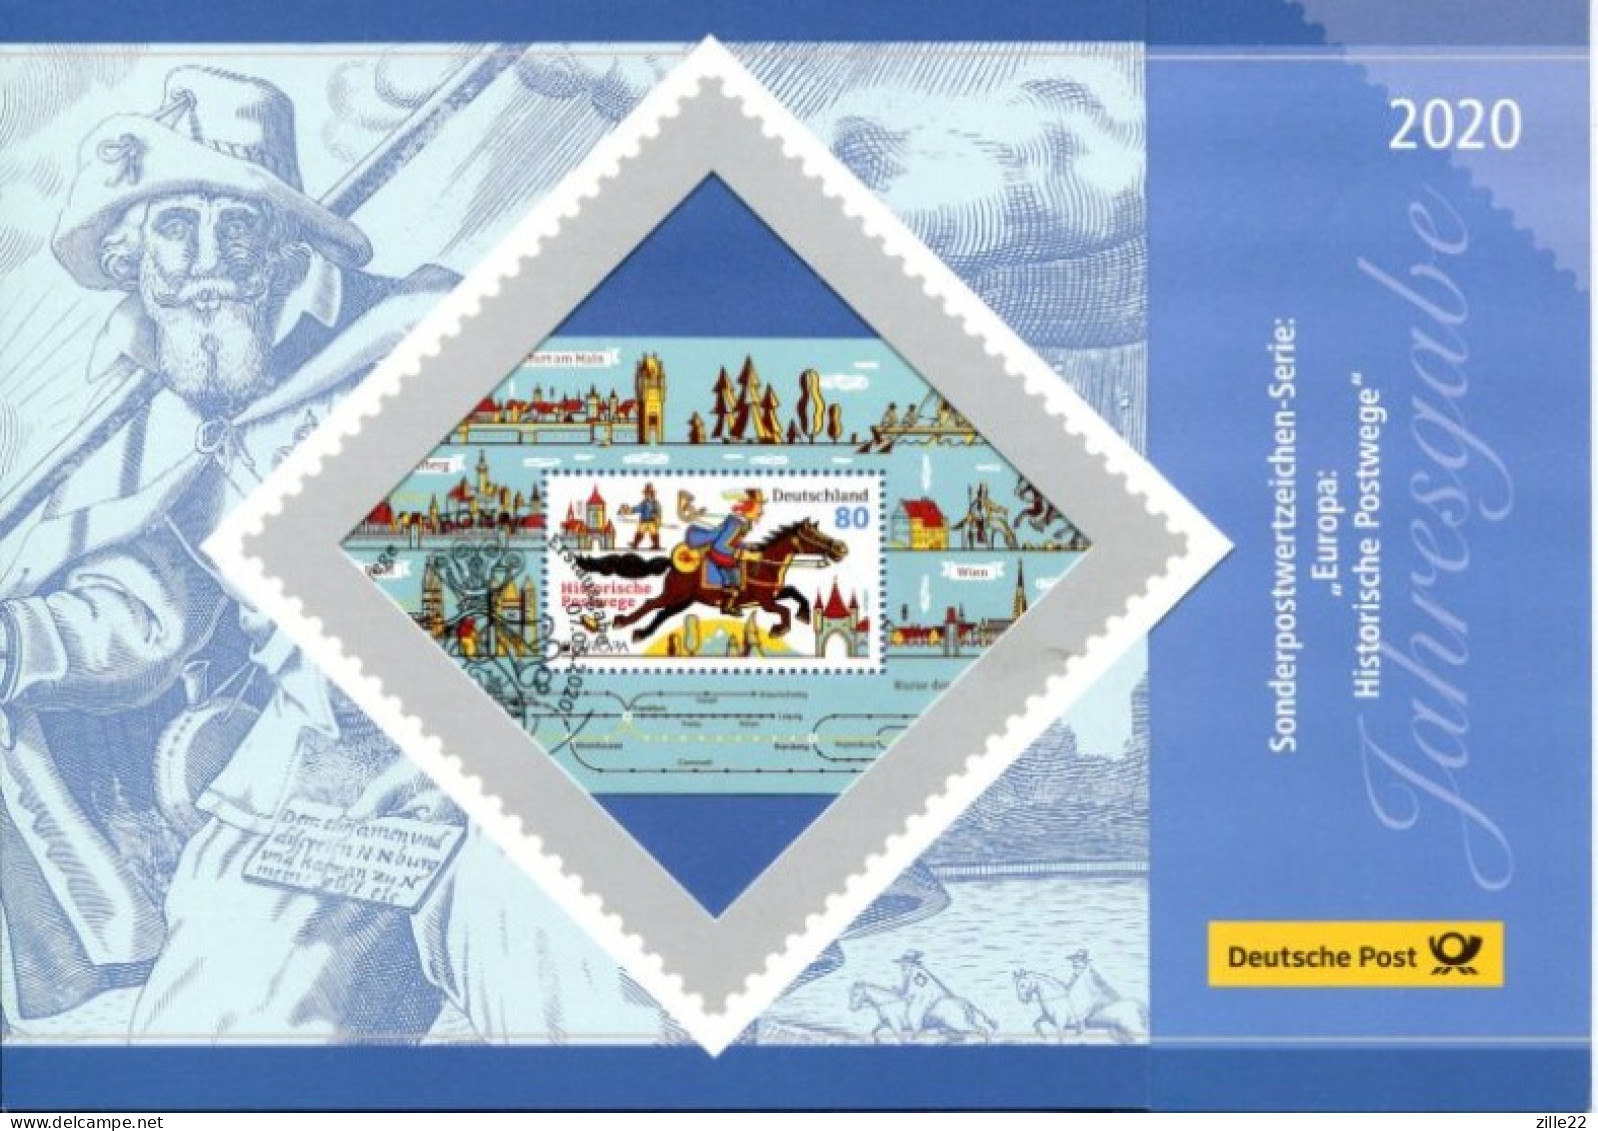 Germany Special FDC 2020 Issue In A5 Folder - Europa Cept Historical Mail Routings - 2011-…